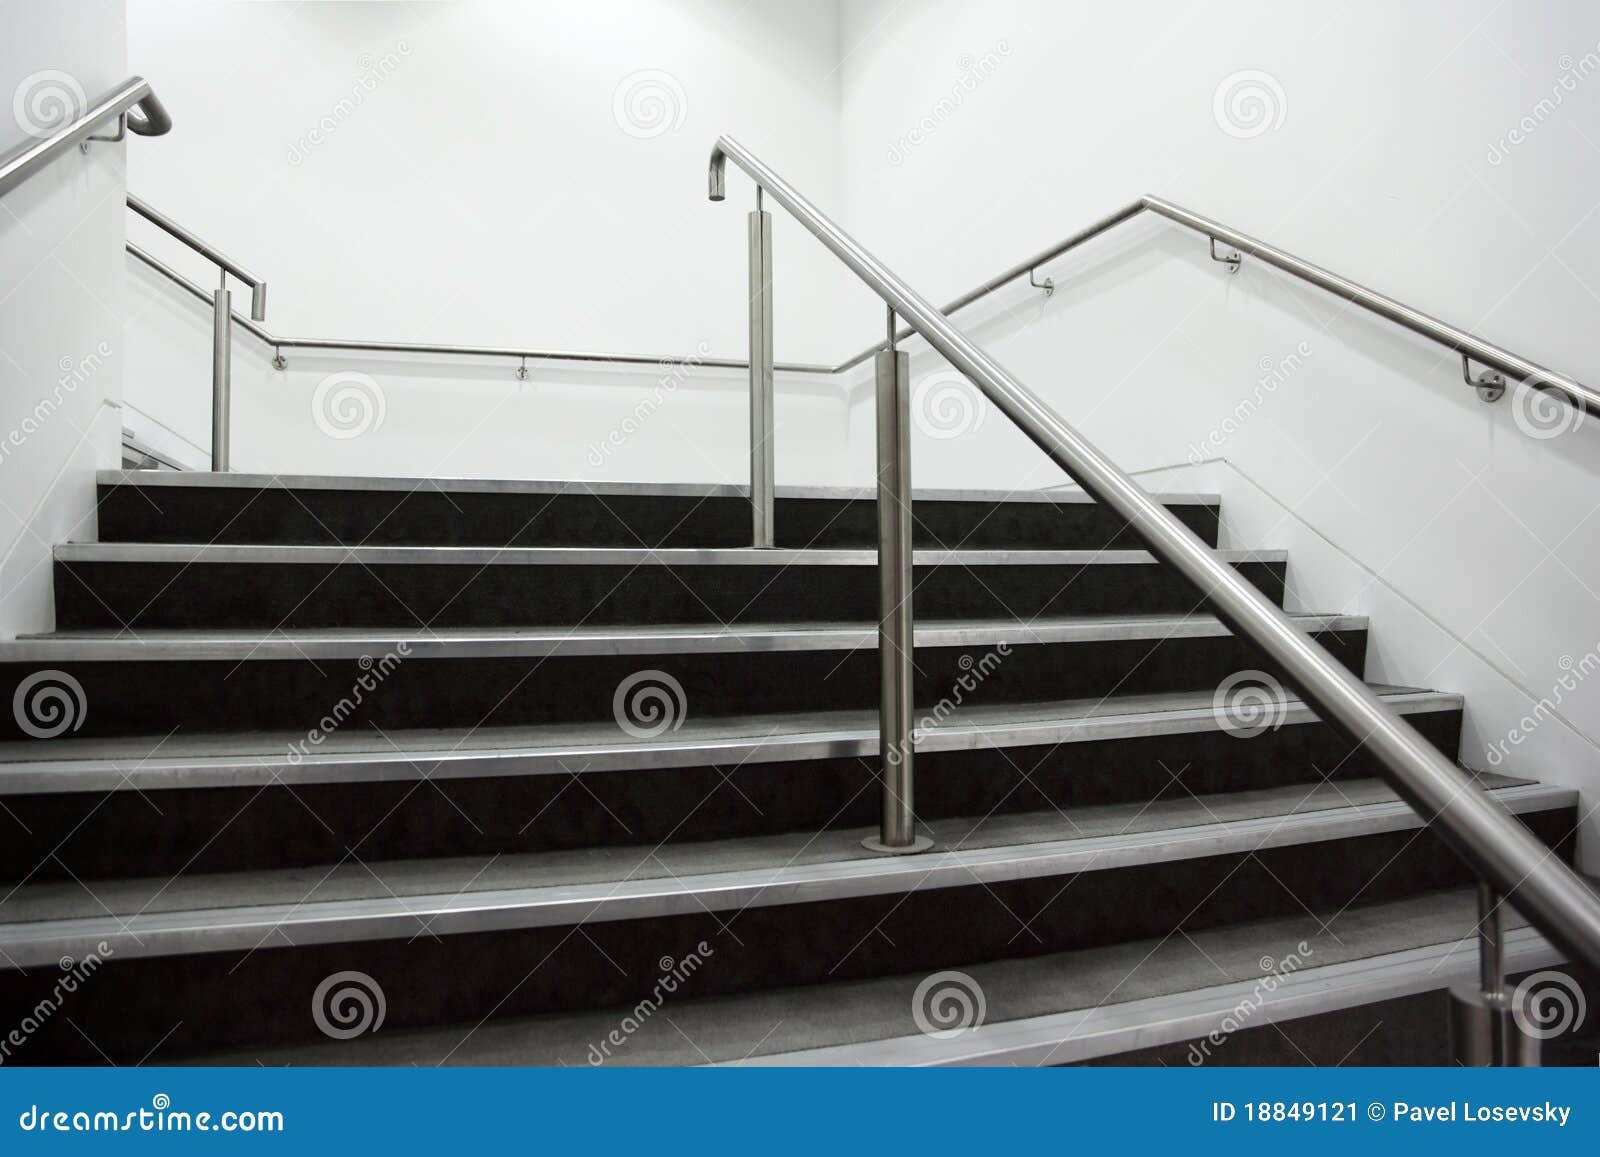 wide staircase with chrome handrails